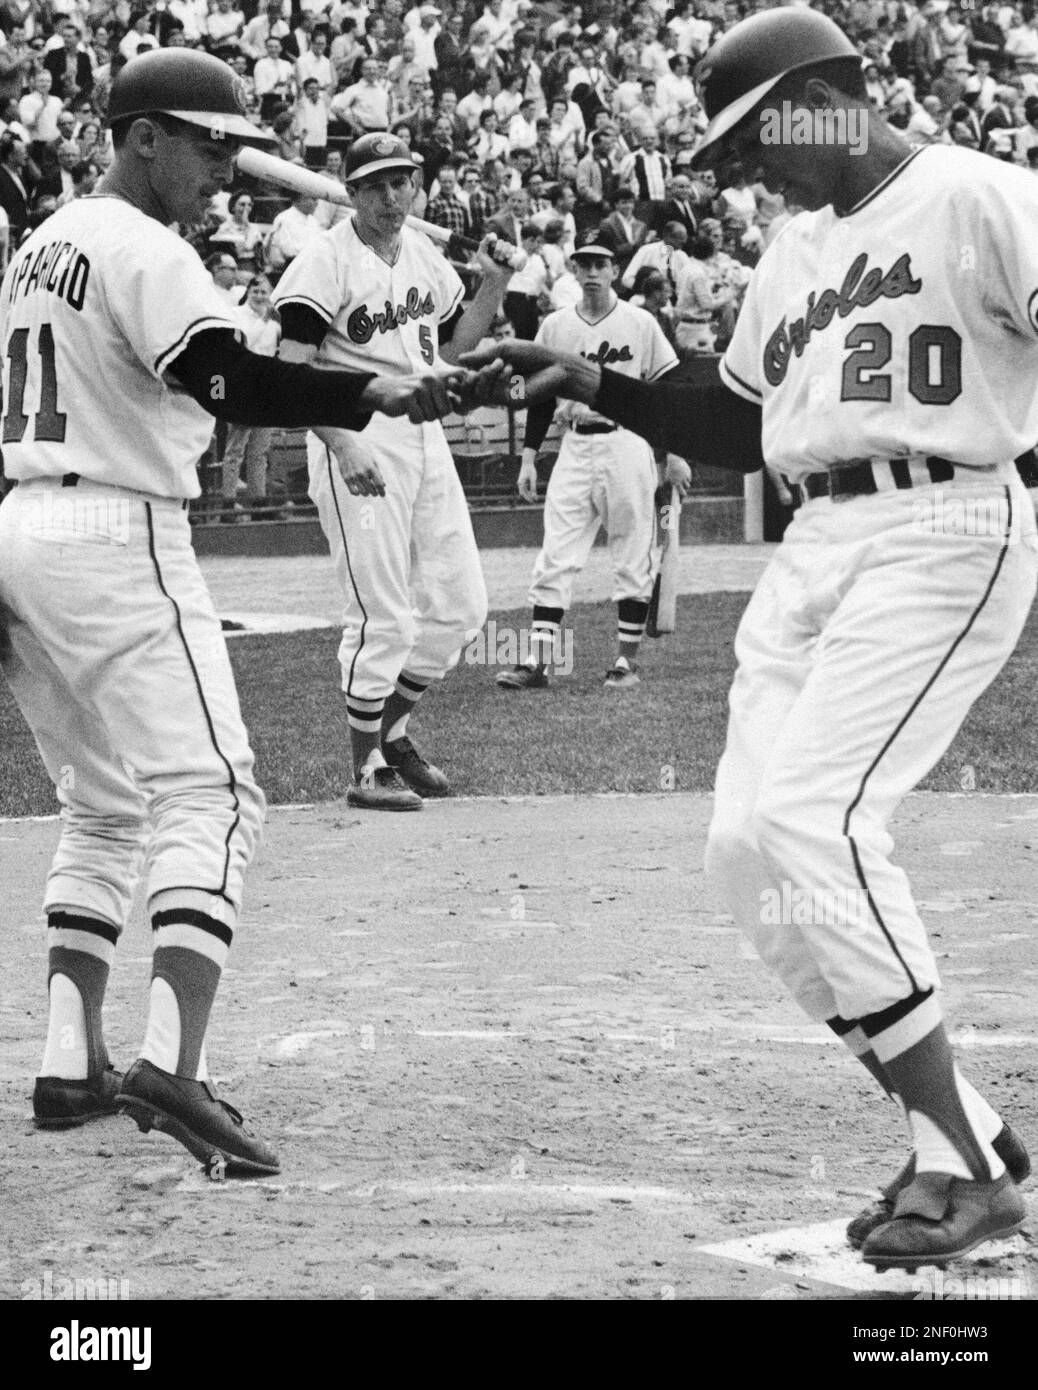 Baltimore's Frank Robinson (20) is greeted at home plate by